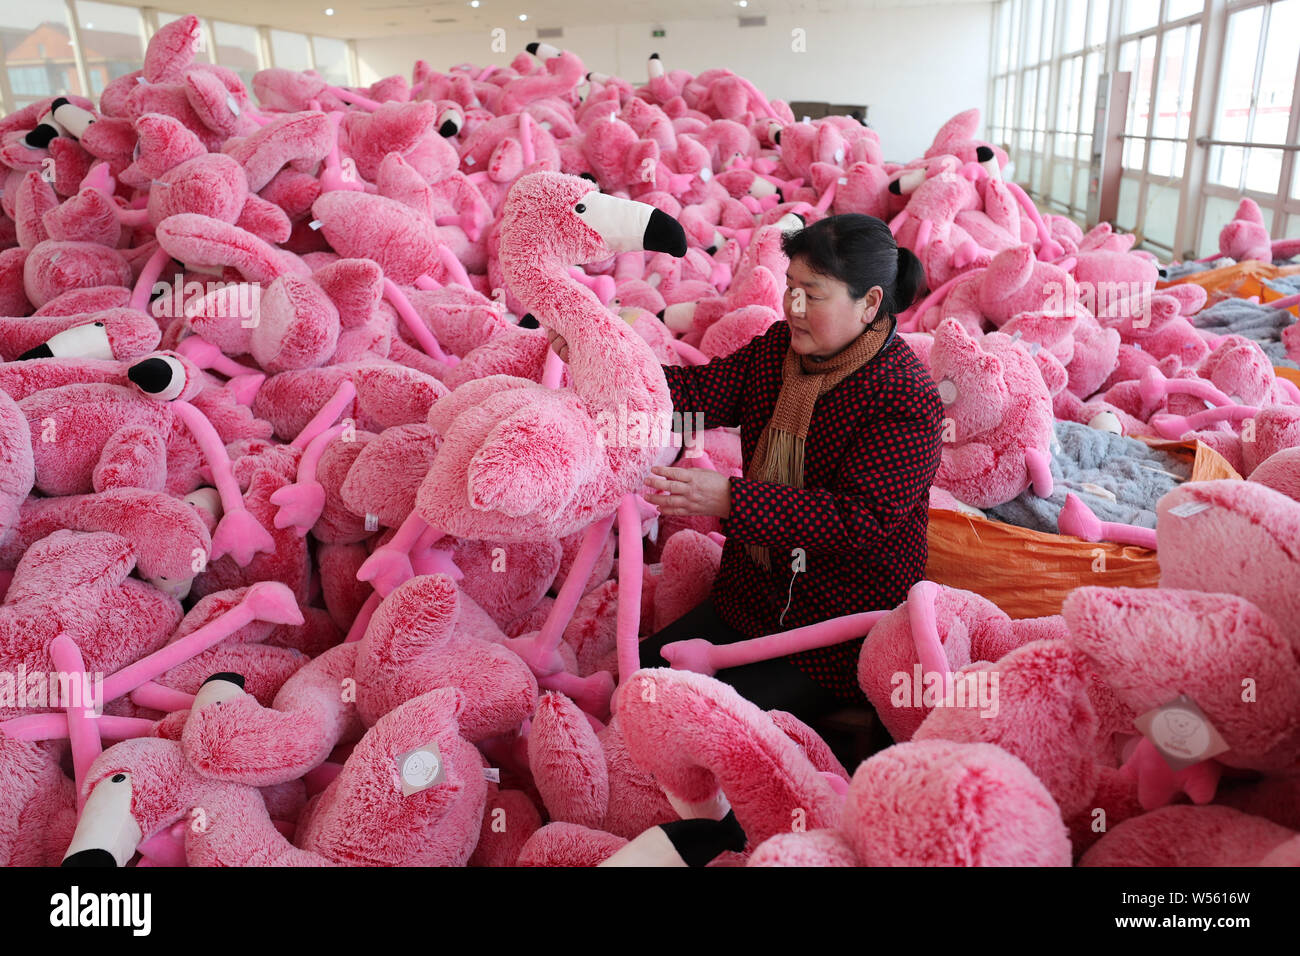 Chinese workers make stuffed toys at a toy factory in Lianyungang city,  east China's Jiangsu province, 21 February 2019. China has posted a  surprise Stock Photo - Alamy